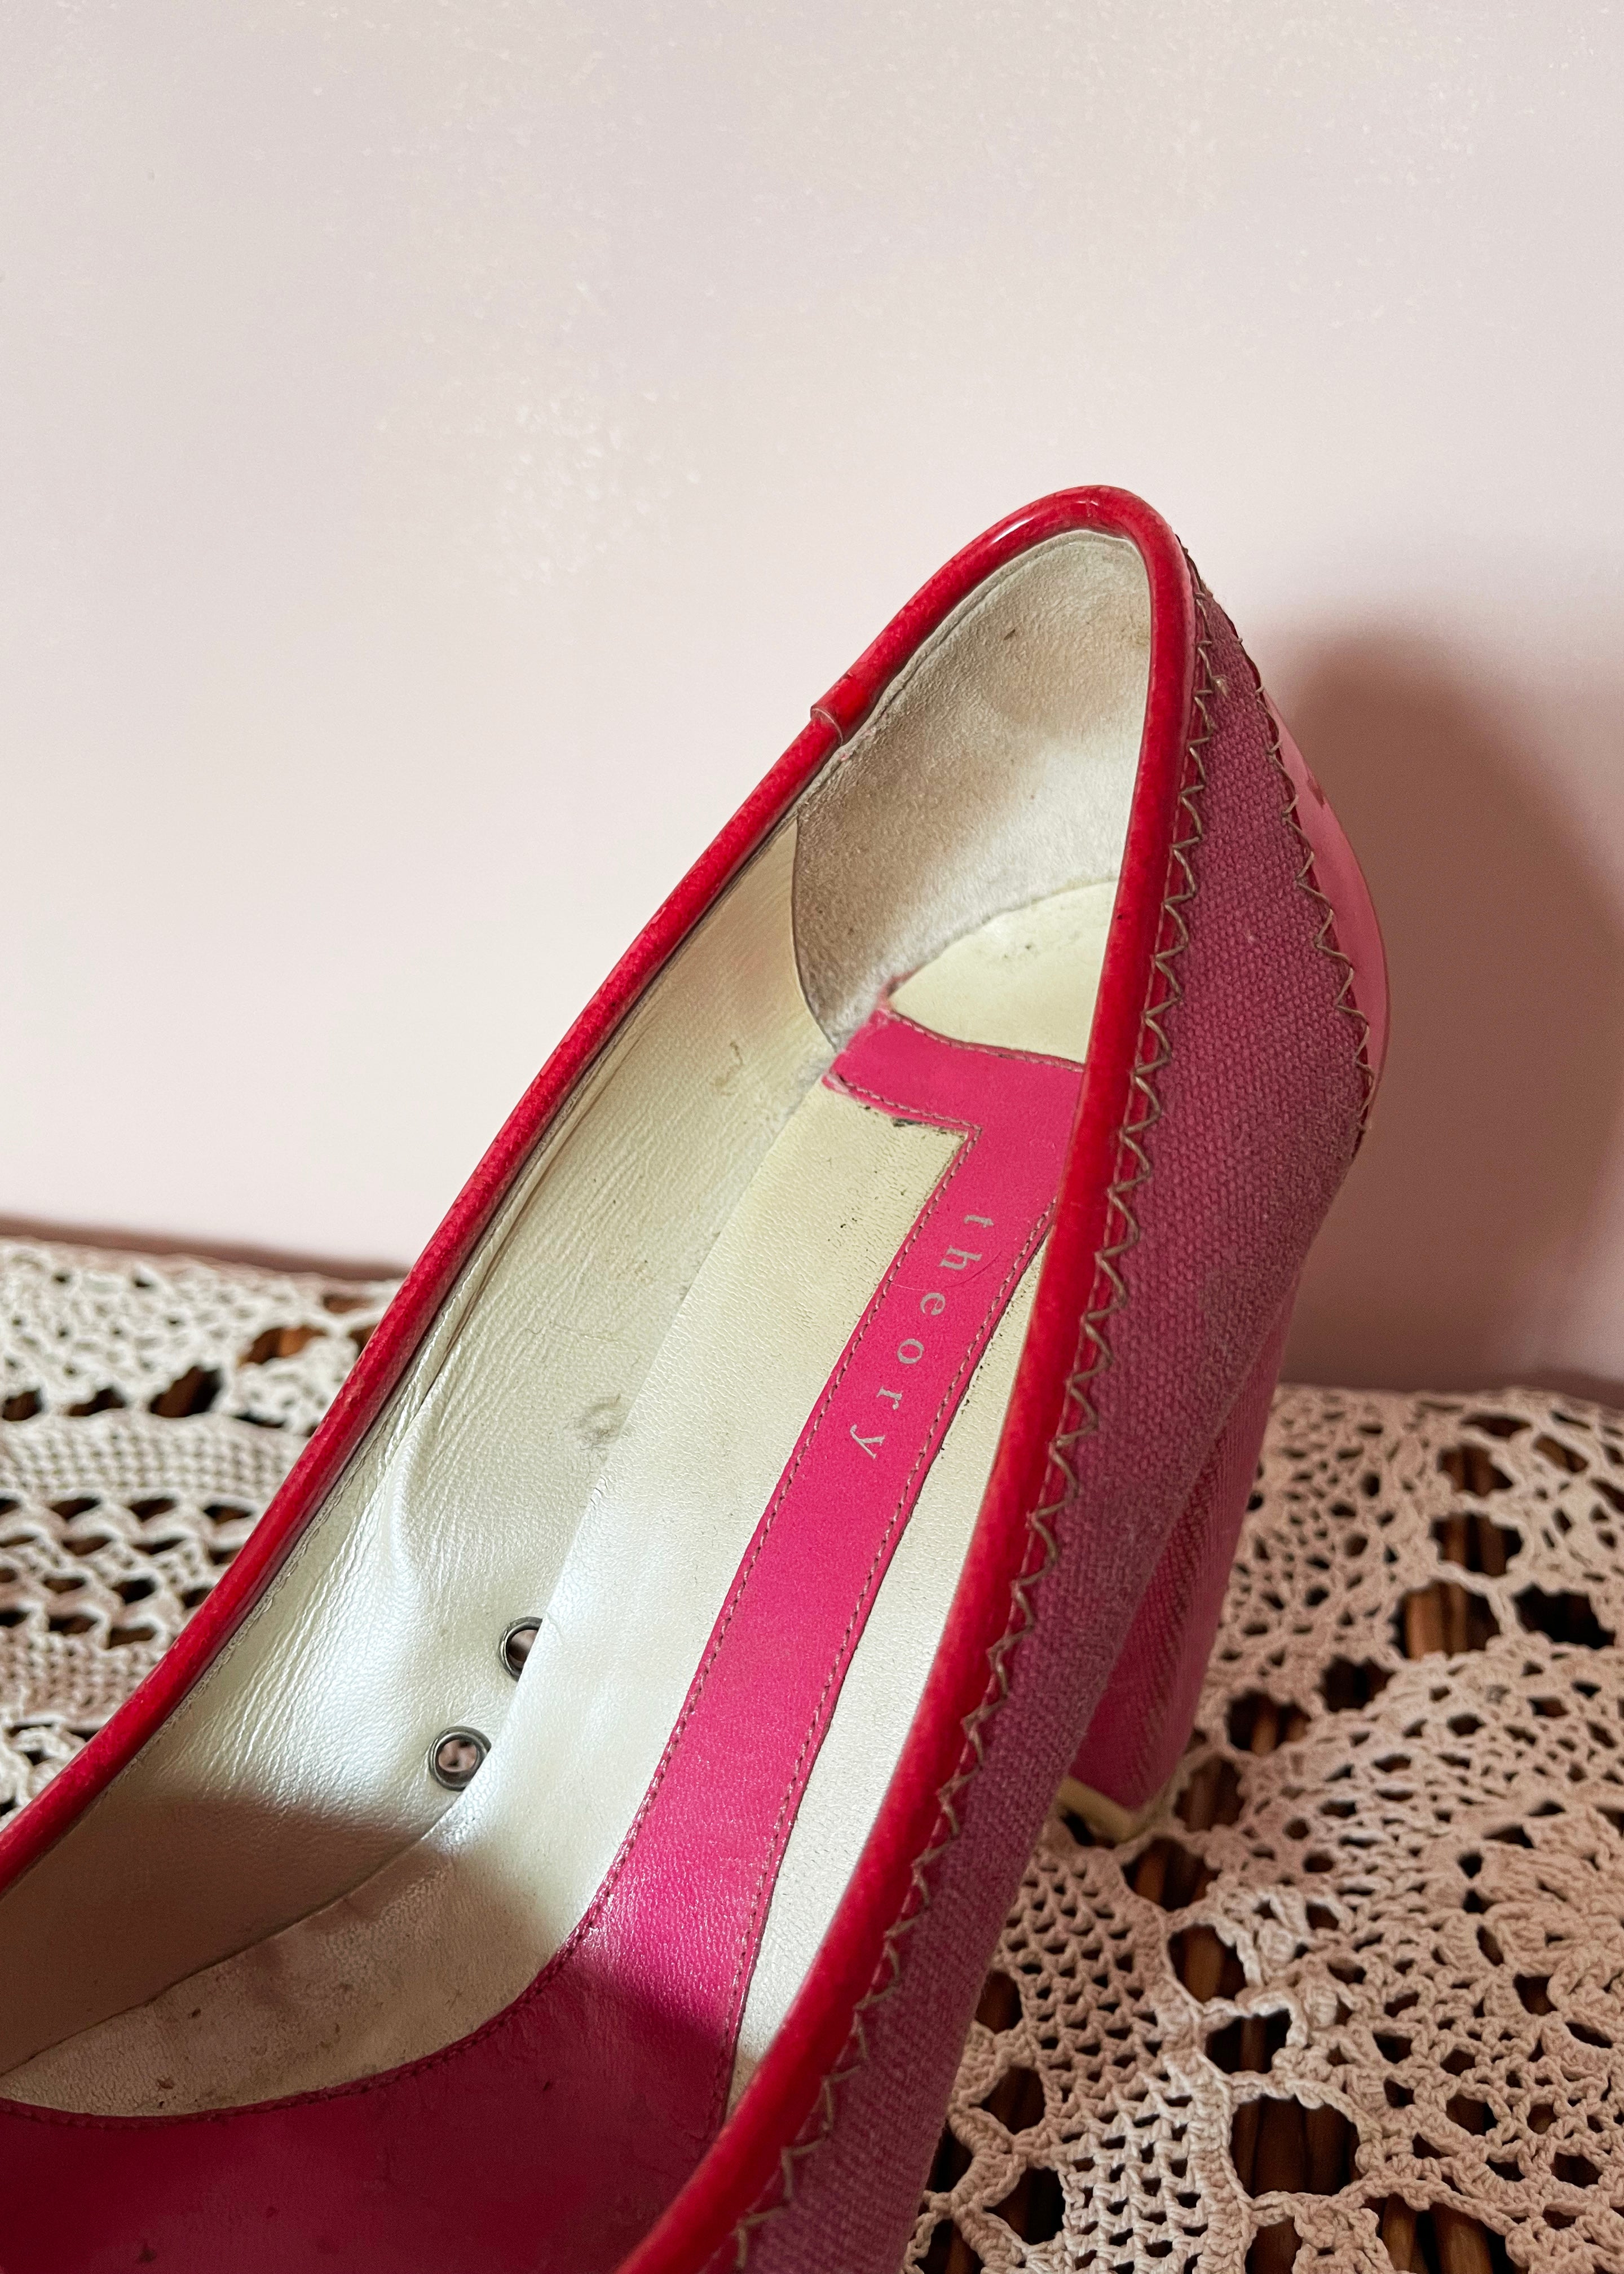 Theory Red and Pink Heeled Pumps